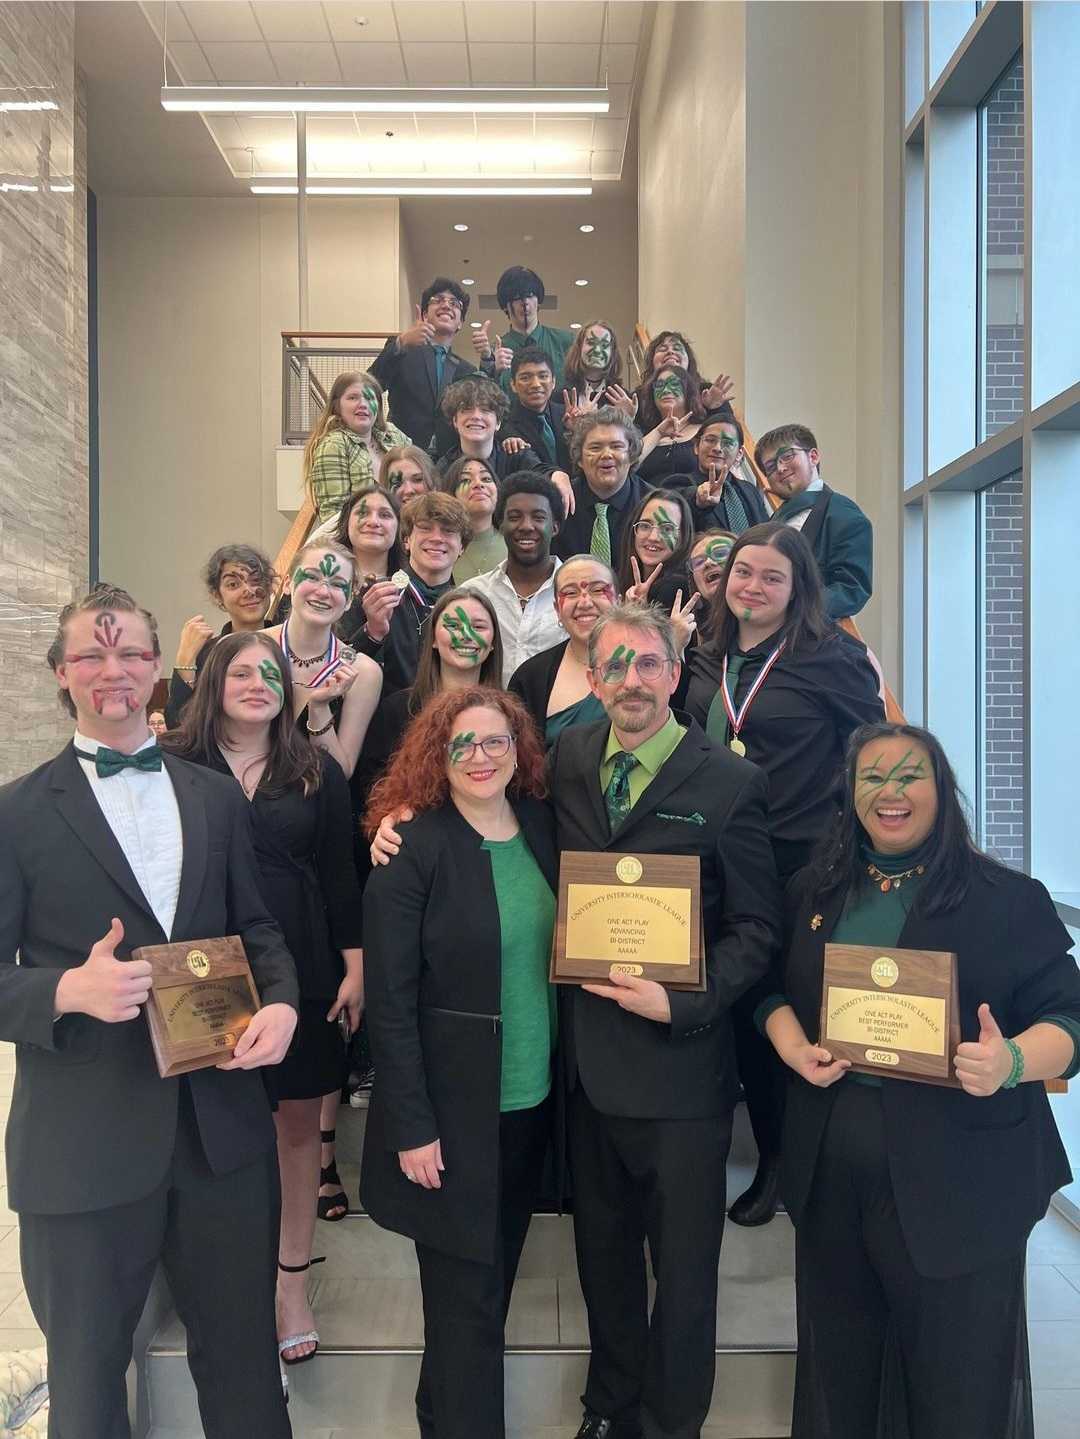 Fine+arts+department+competes+and+wins+big+at+UIL